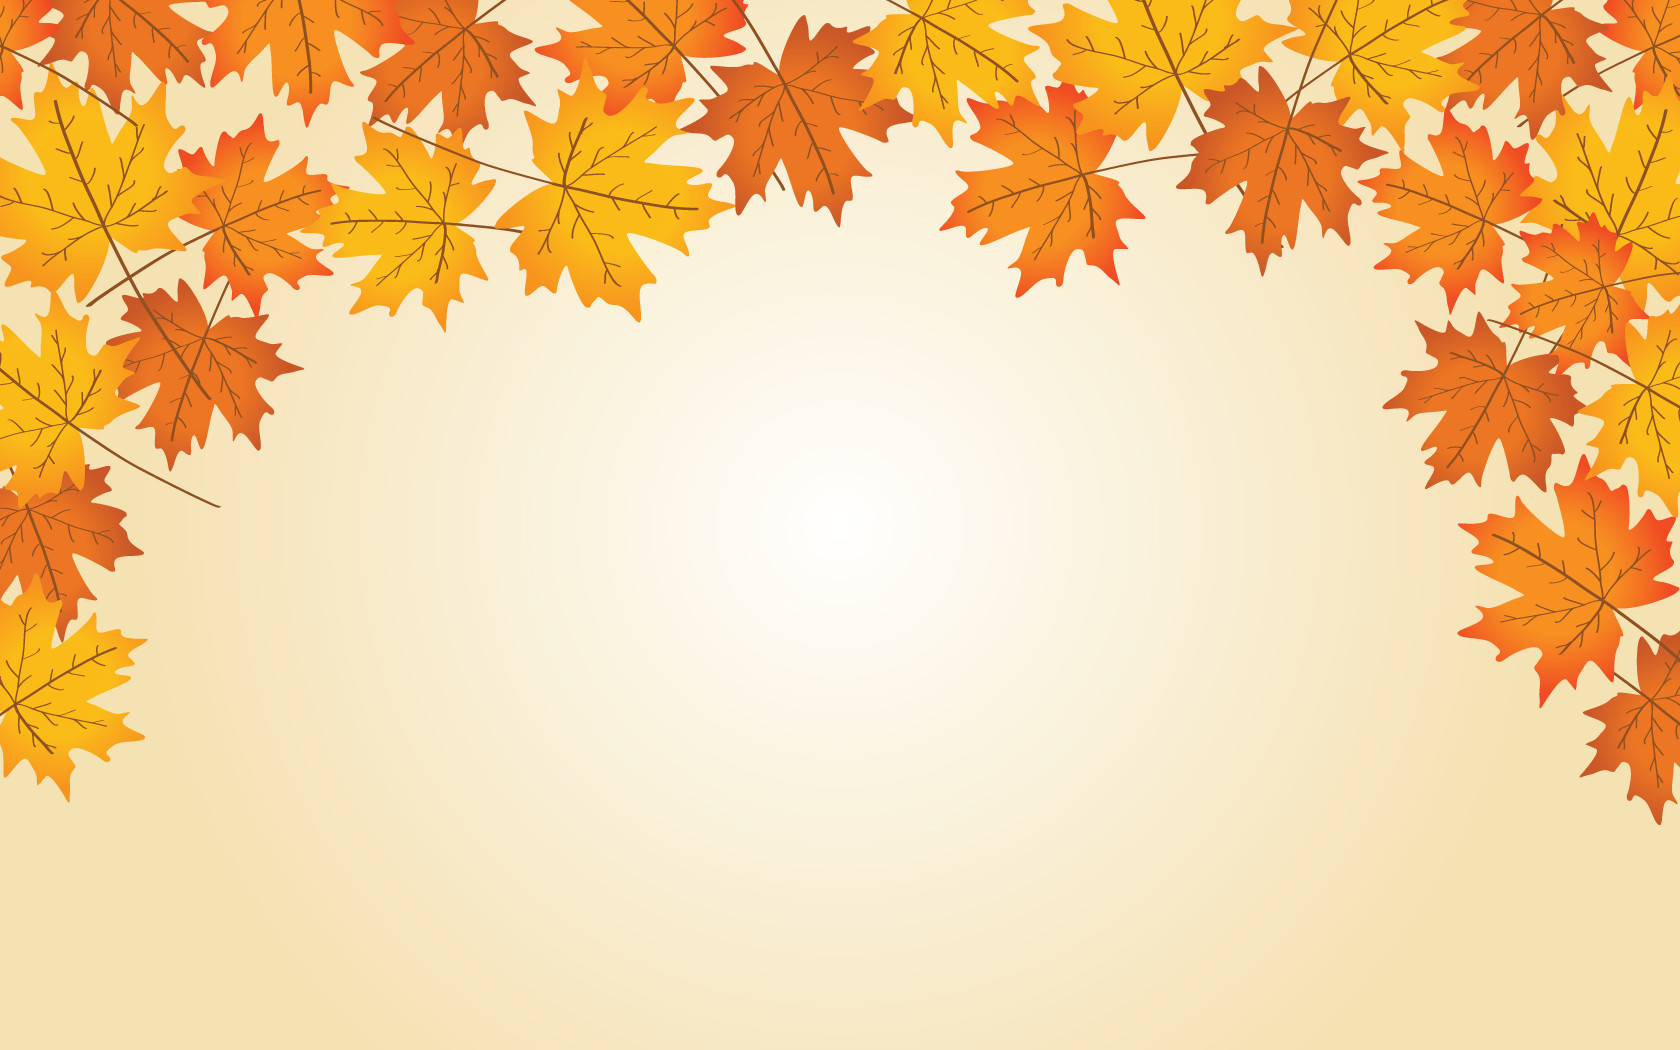 Autumn Backgrounds Pictures - Wallpaper Cave